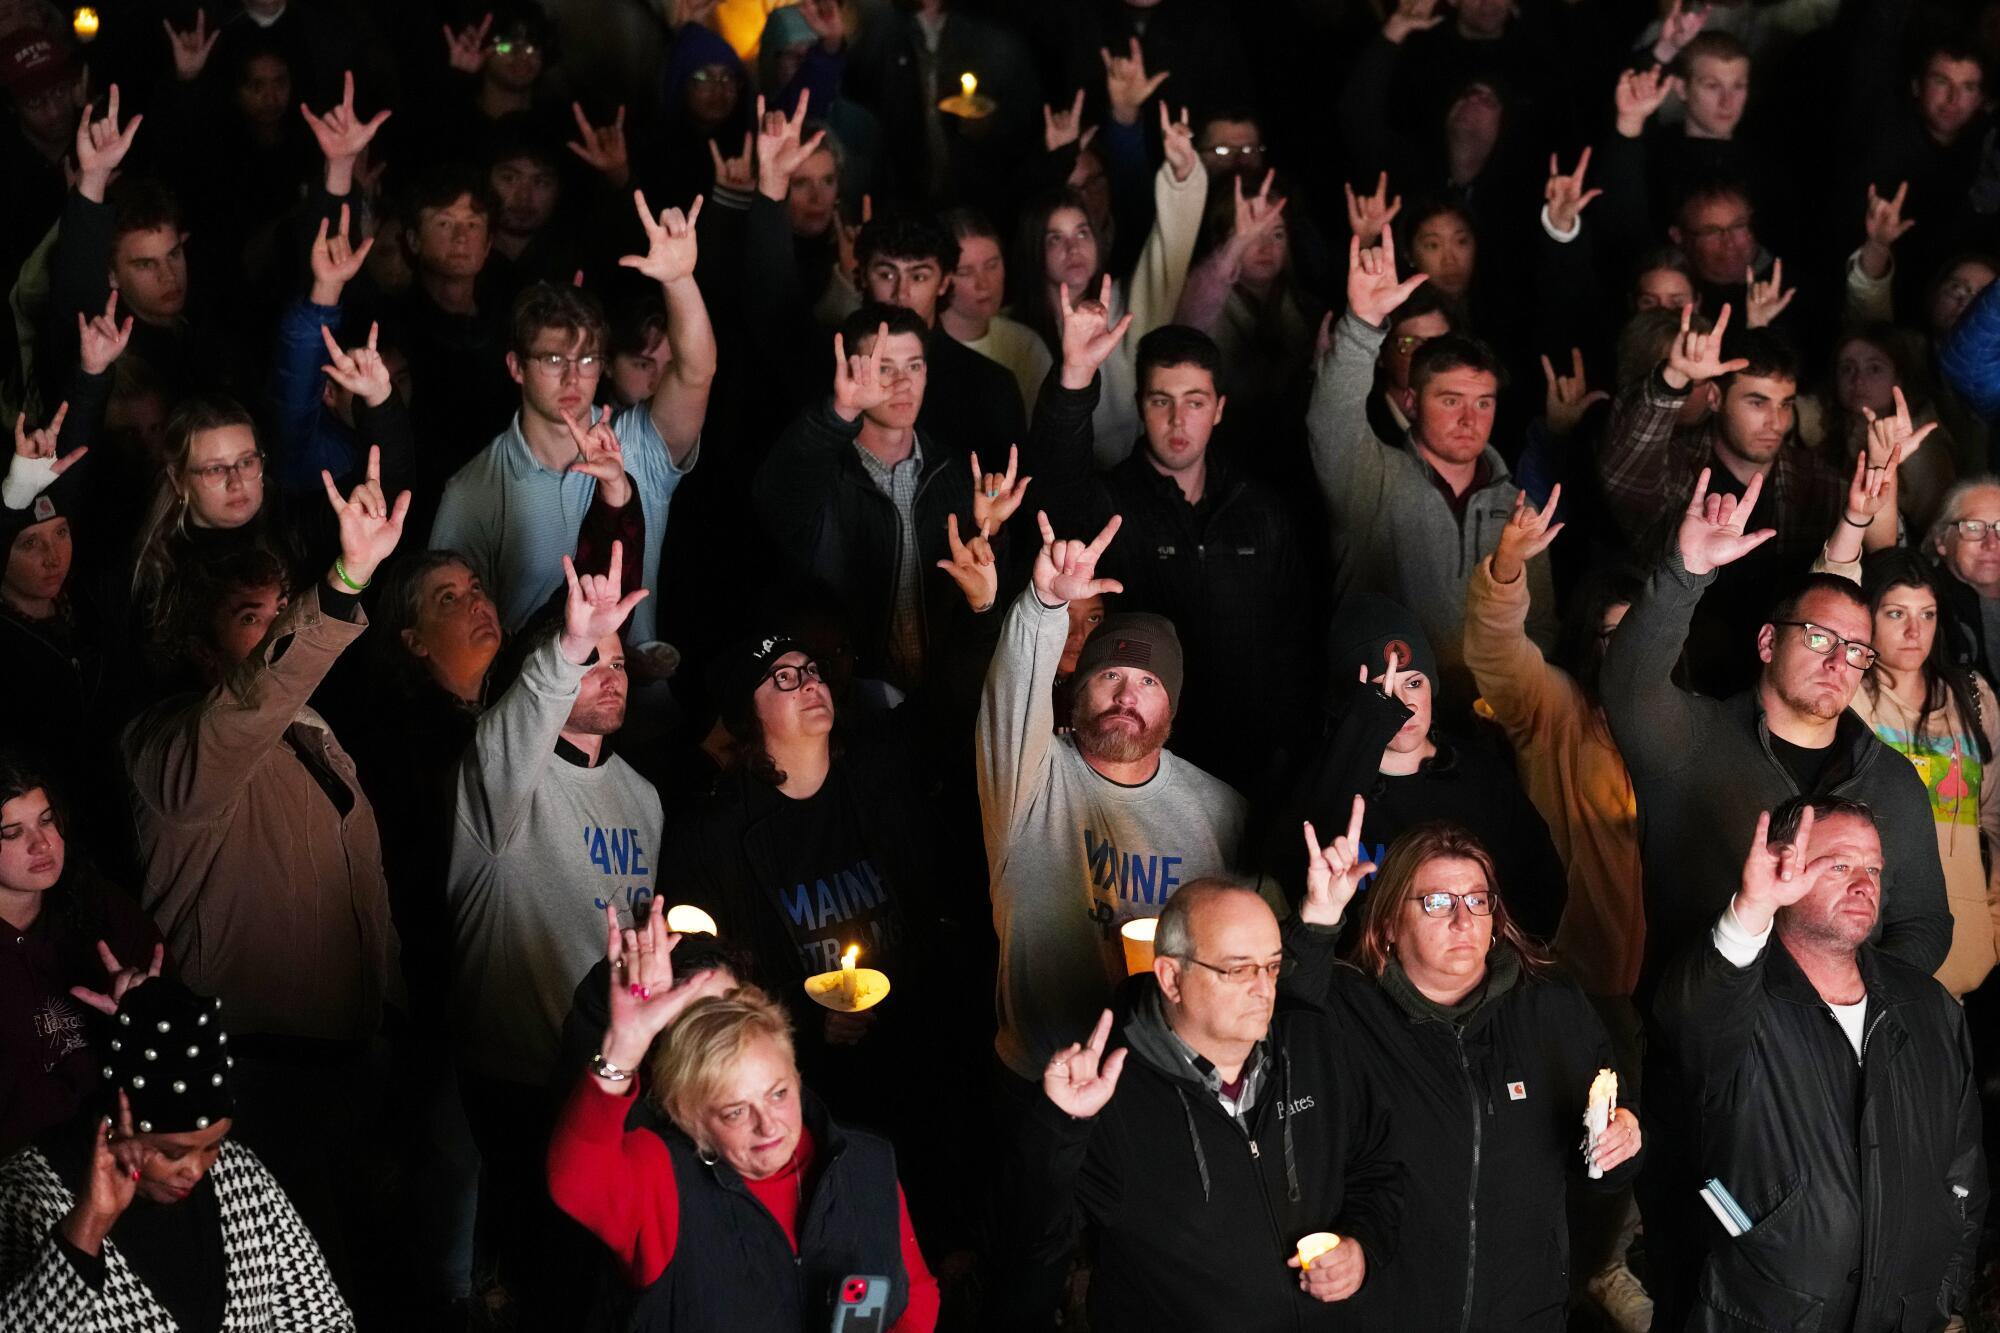 People raise their hands with outer fingers and thumbs extended, the sign for "I love you"